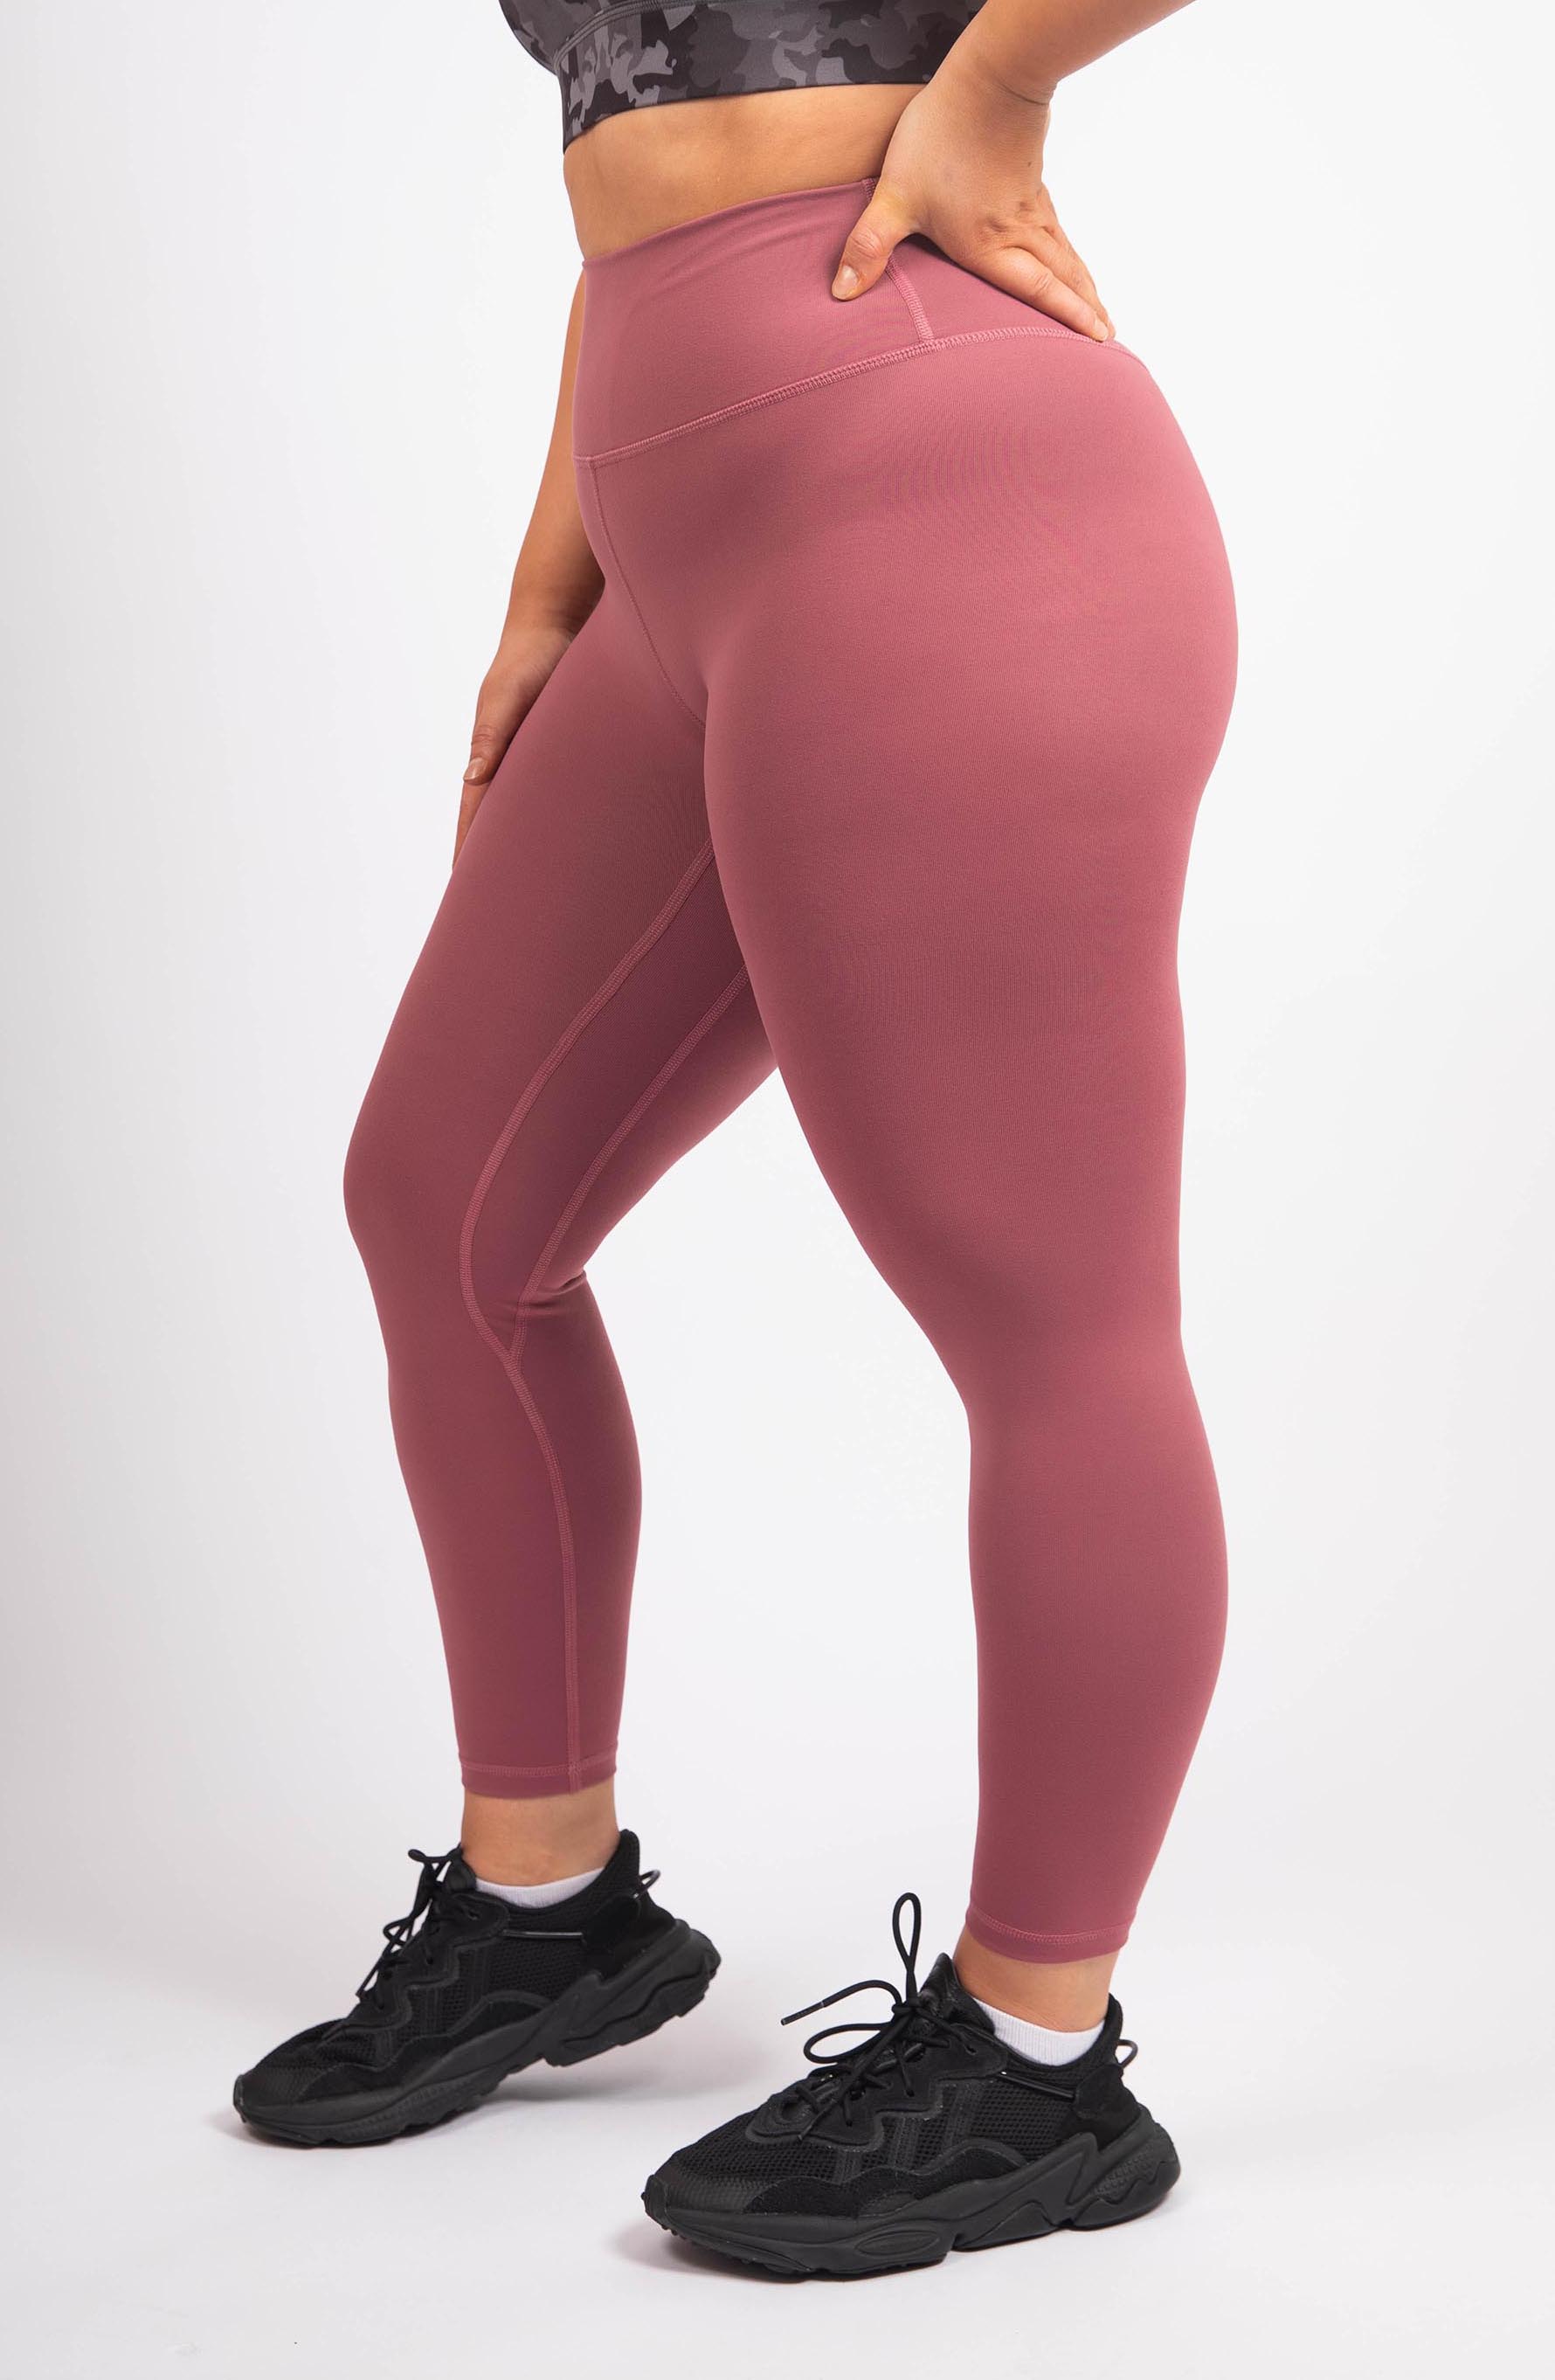 Maroon Compressive Leggings with Pockets That Don't Roll Down